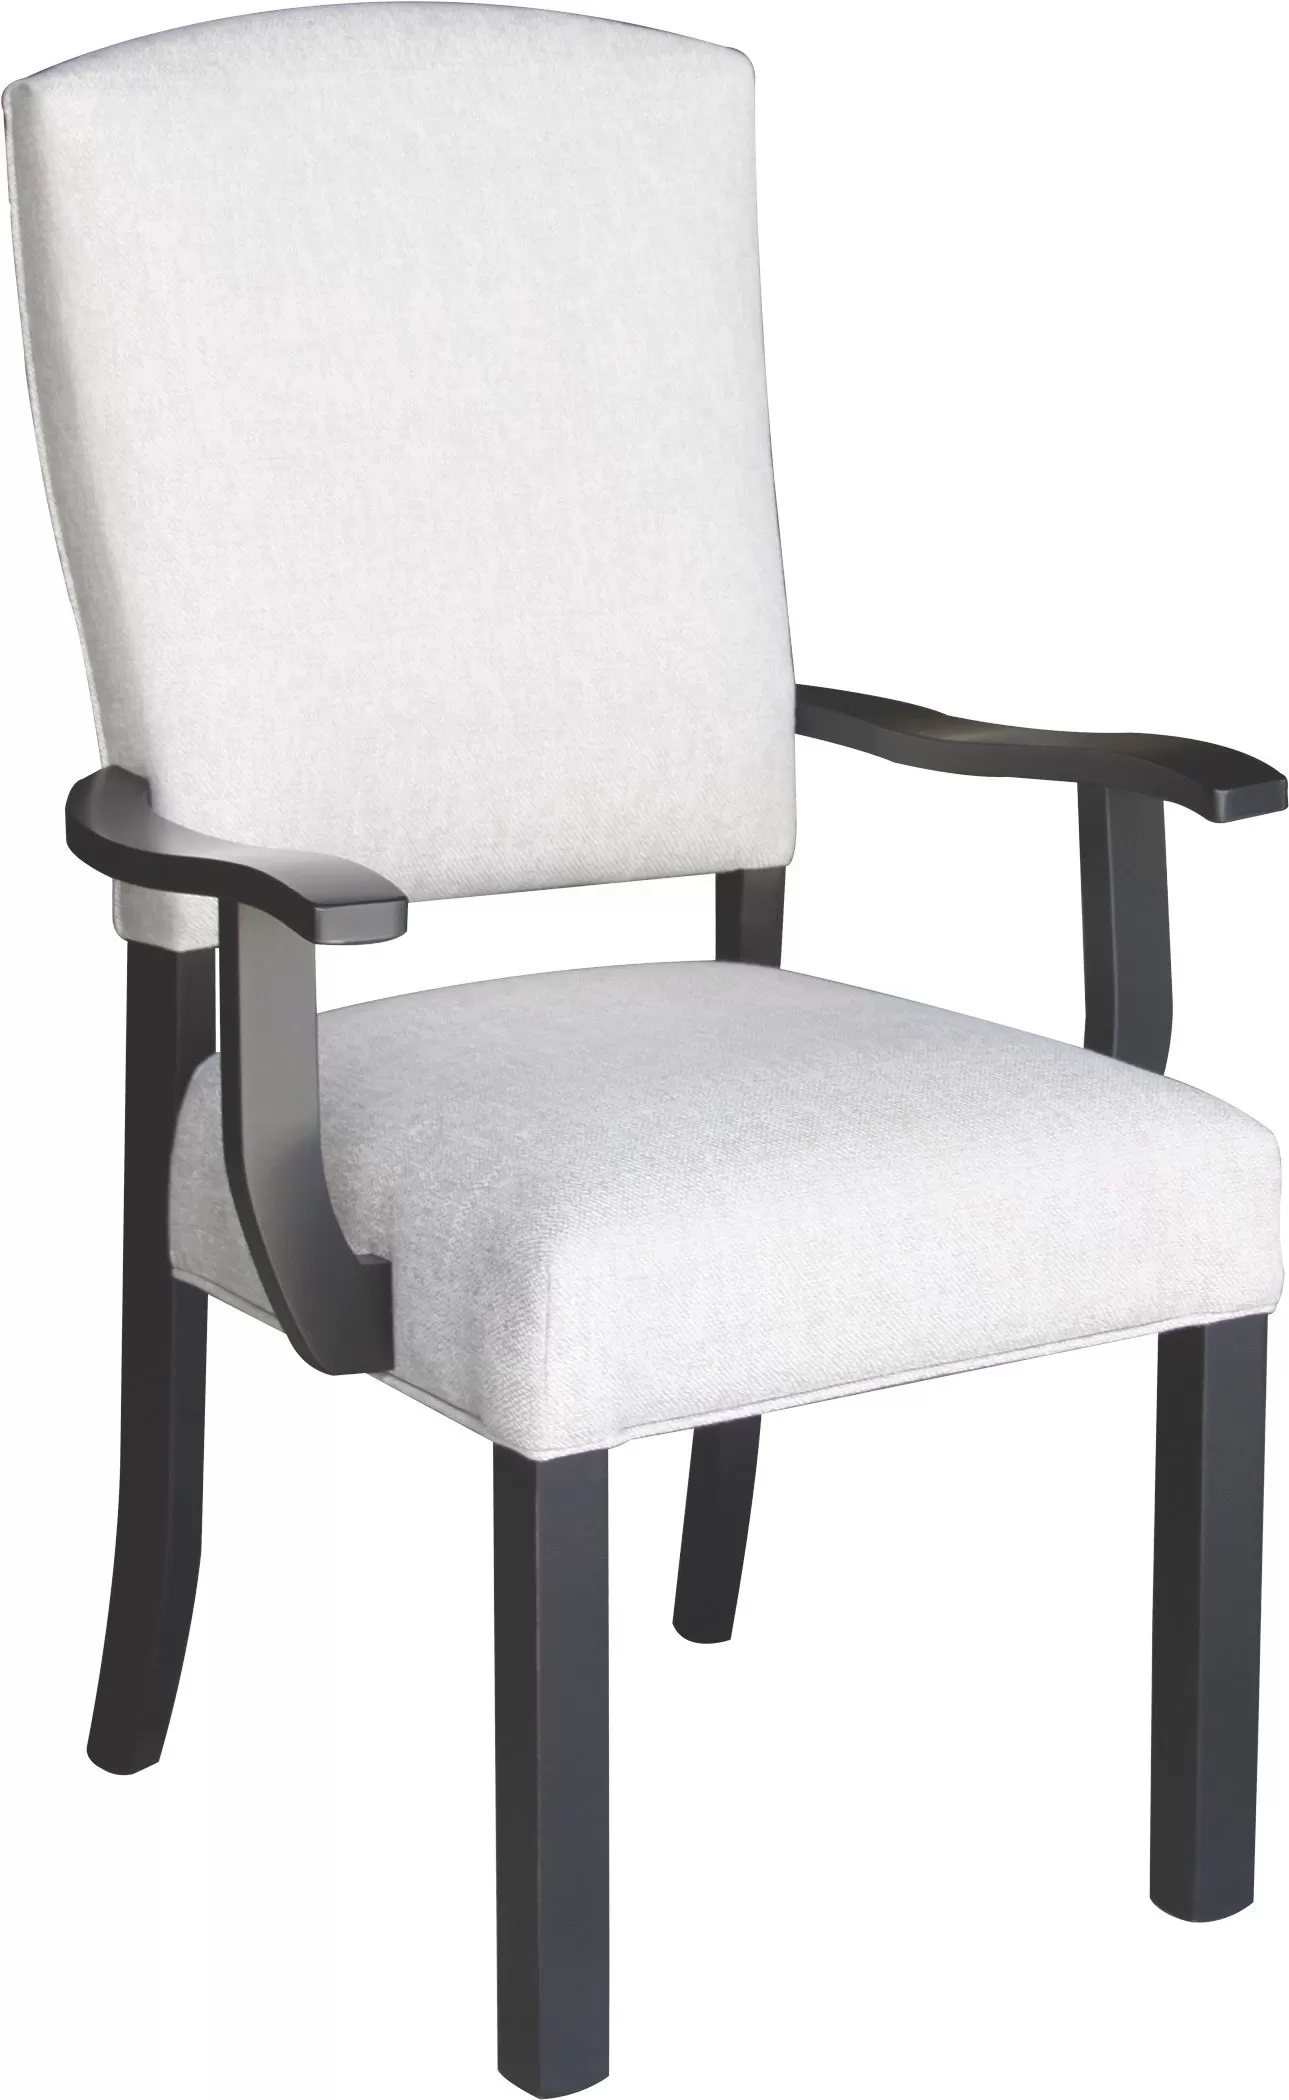 Athens arm chair